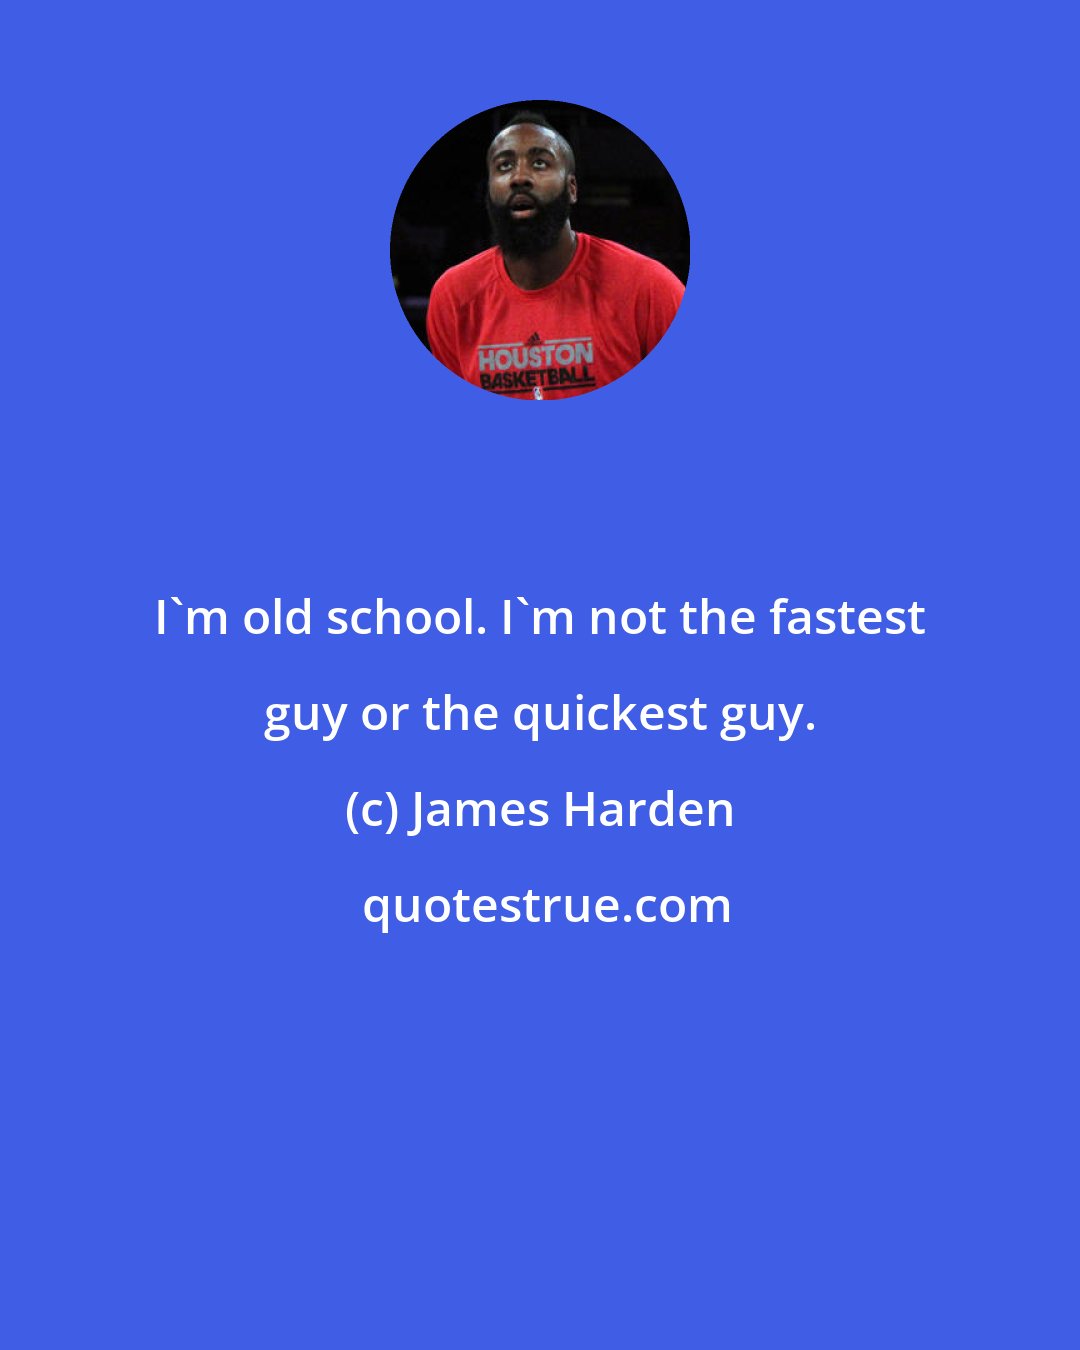 James Harden: I'm old school. I'm not the fastest guy or the quickest guy.